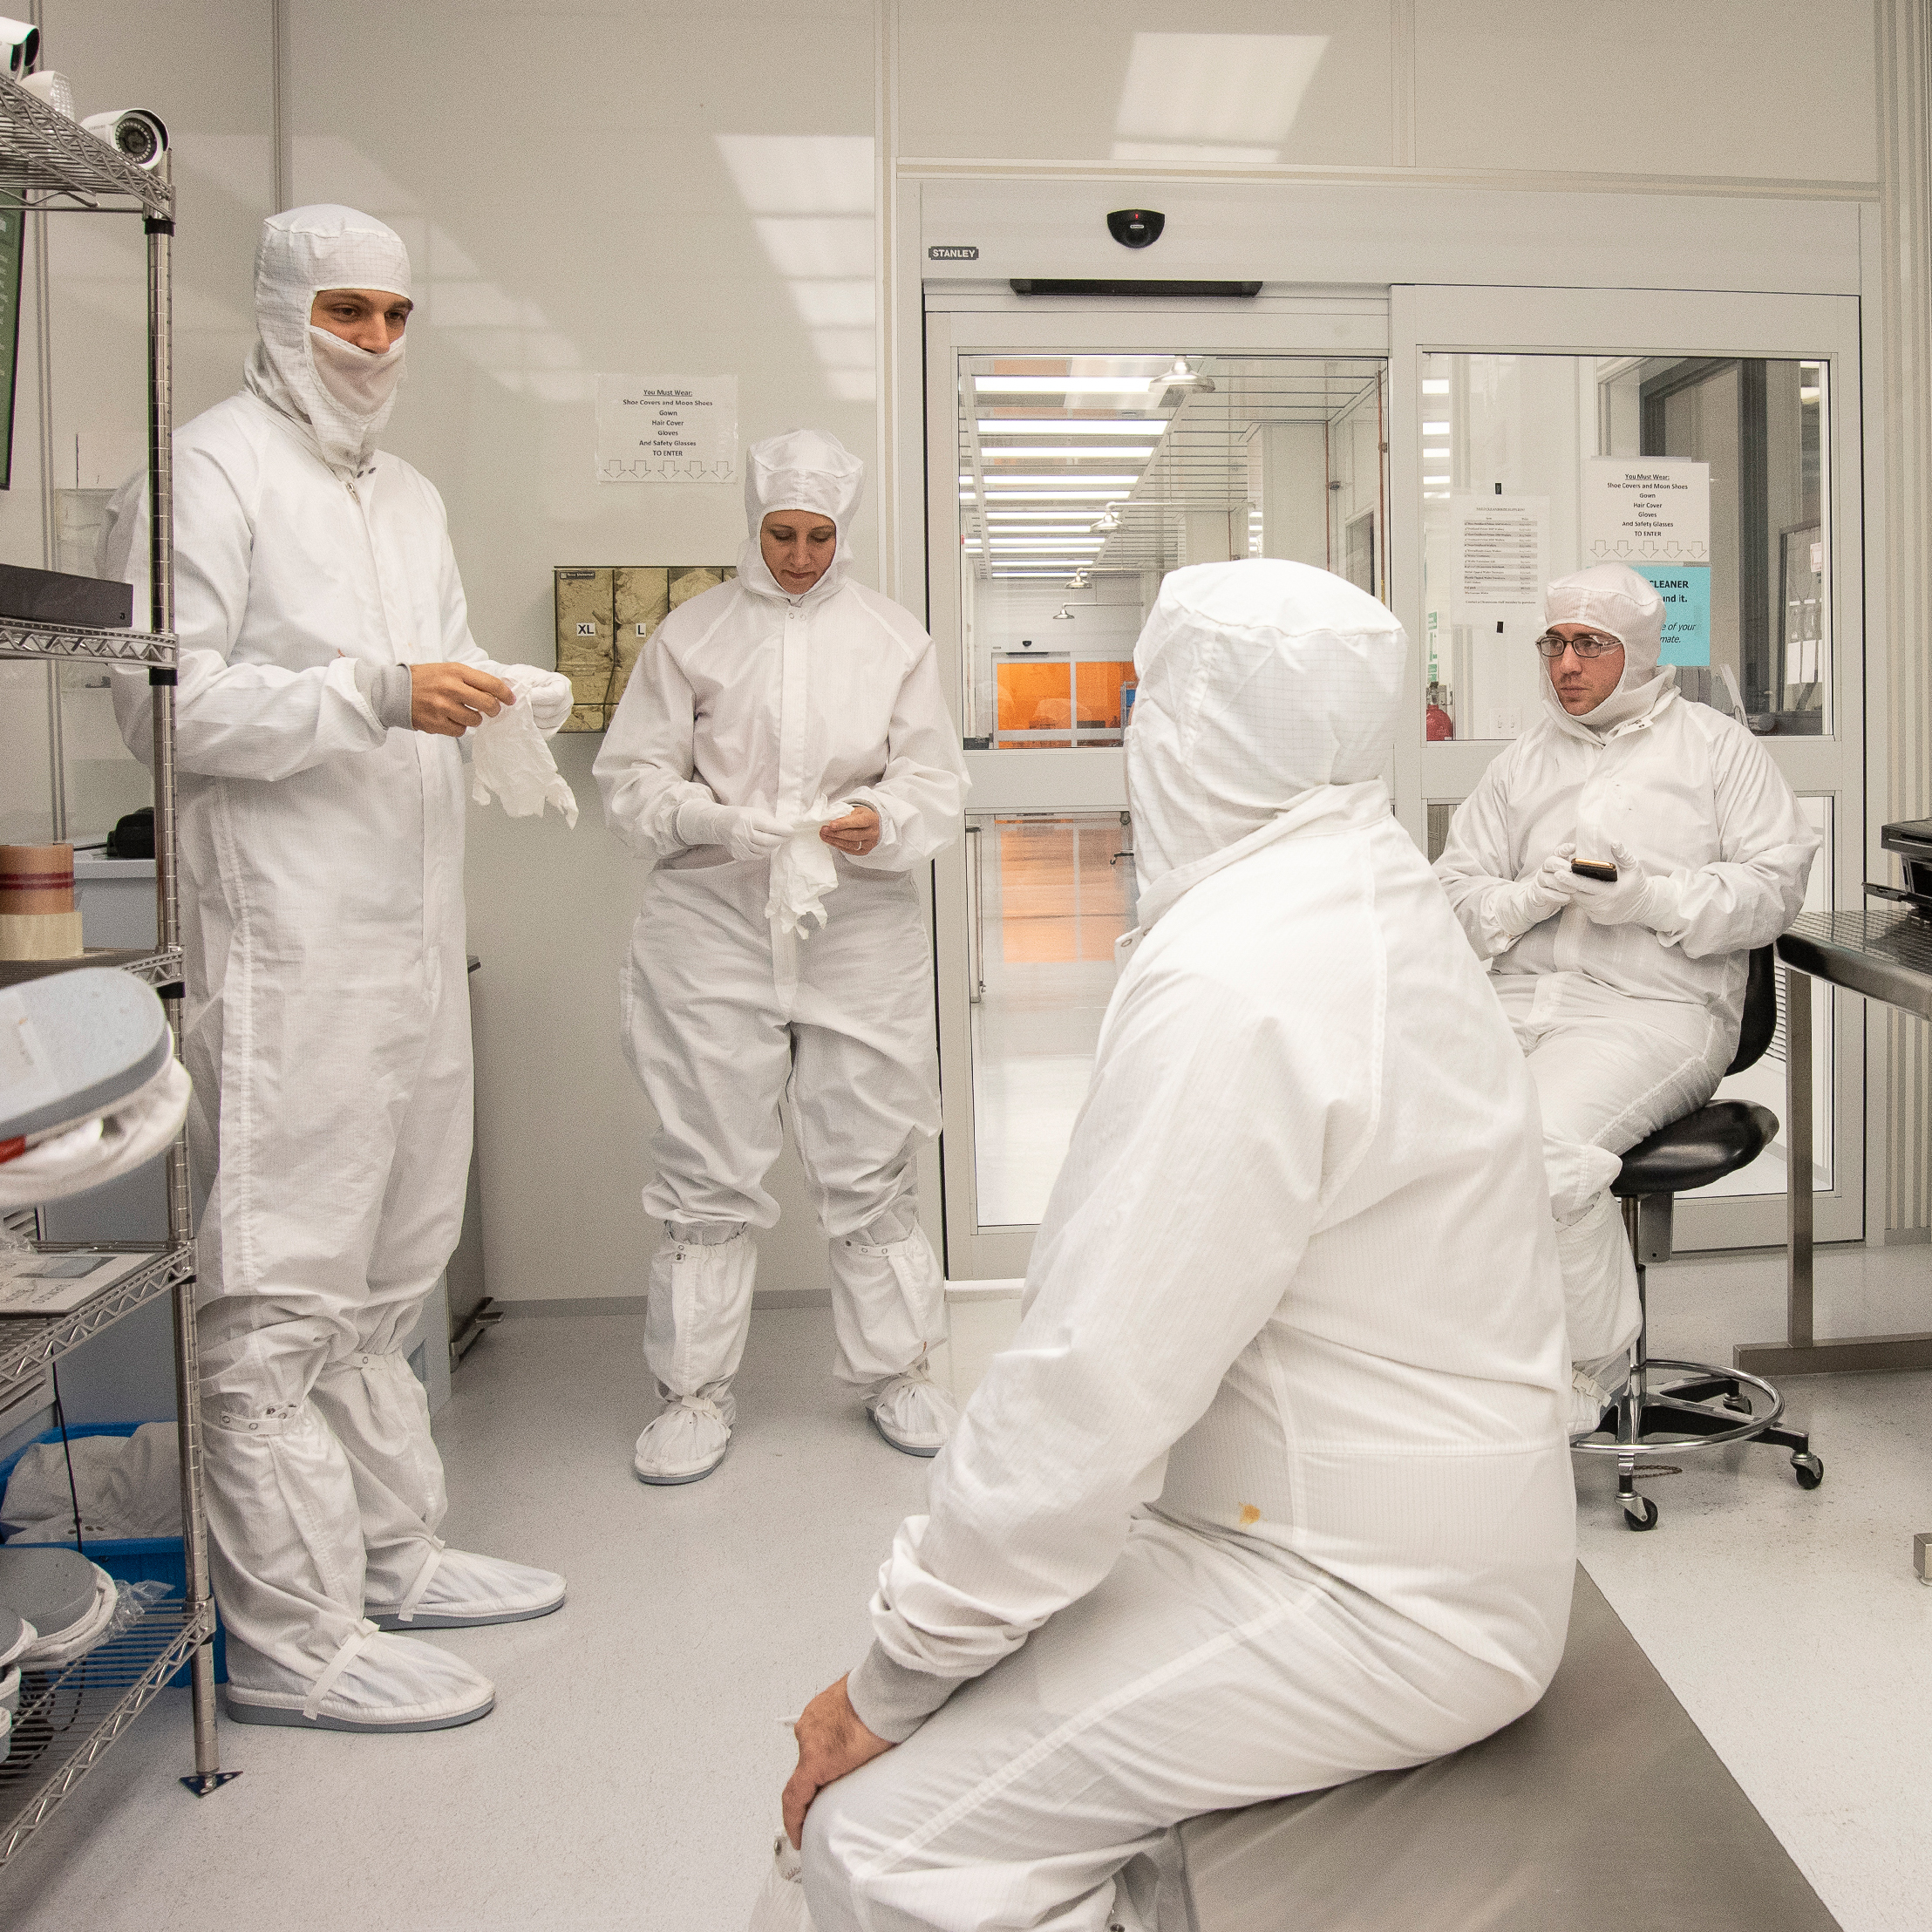 Updating Cleanroom Performance Testing Standards to Meet ANSI Requirements  | Engineered Systems Magazine